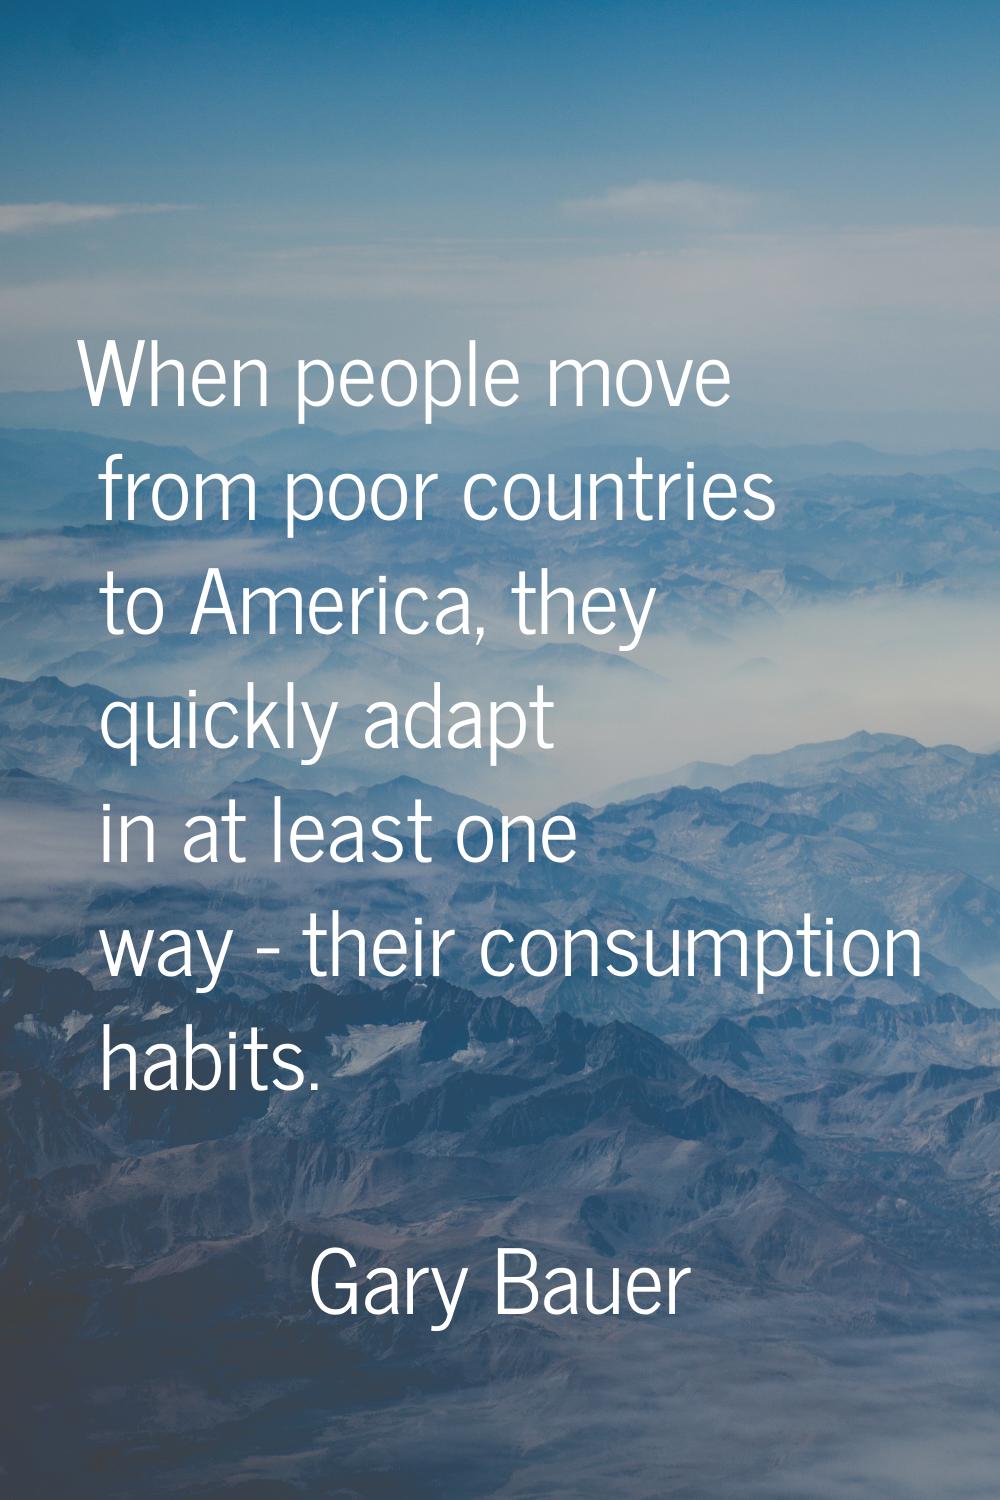 When people move from poor countries to America, they quickly adapt in at least one way - their con